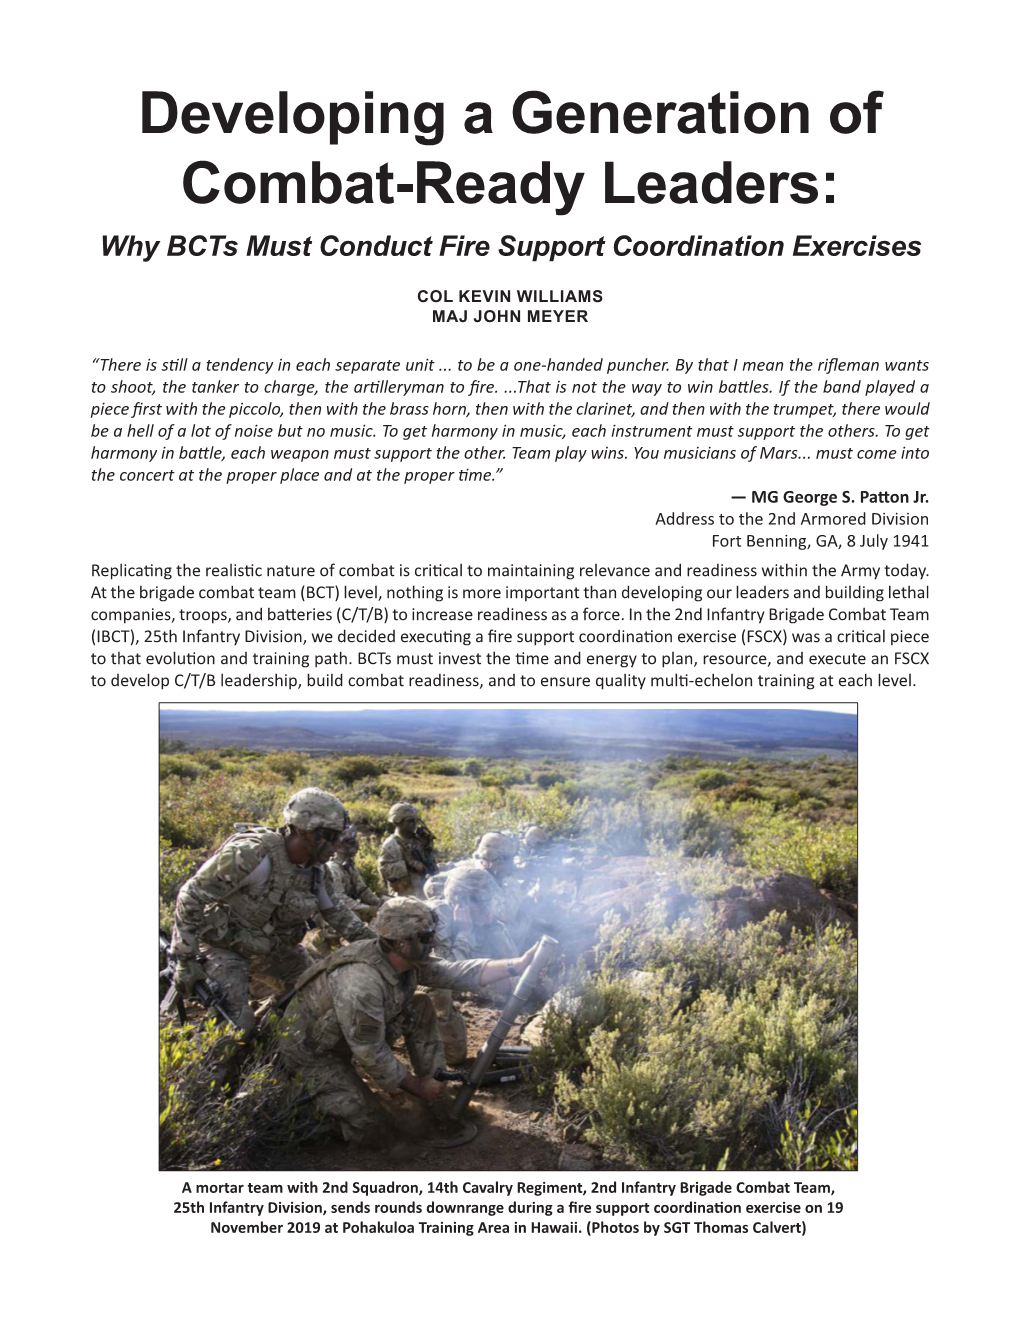 Developing a Generation of Combat-Ready Leaders: Why Bcts Must Conduct Fire Support Coordination Exercises